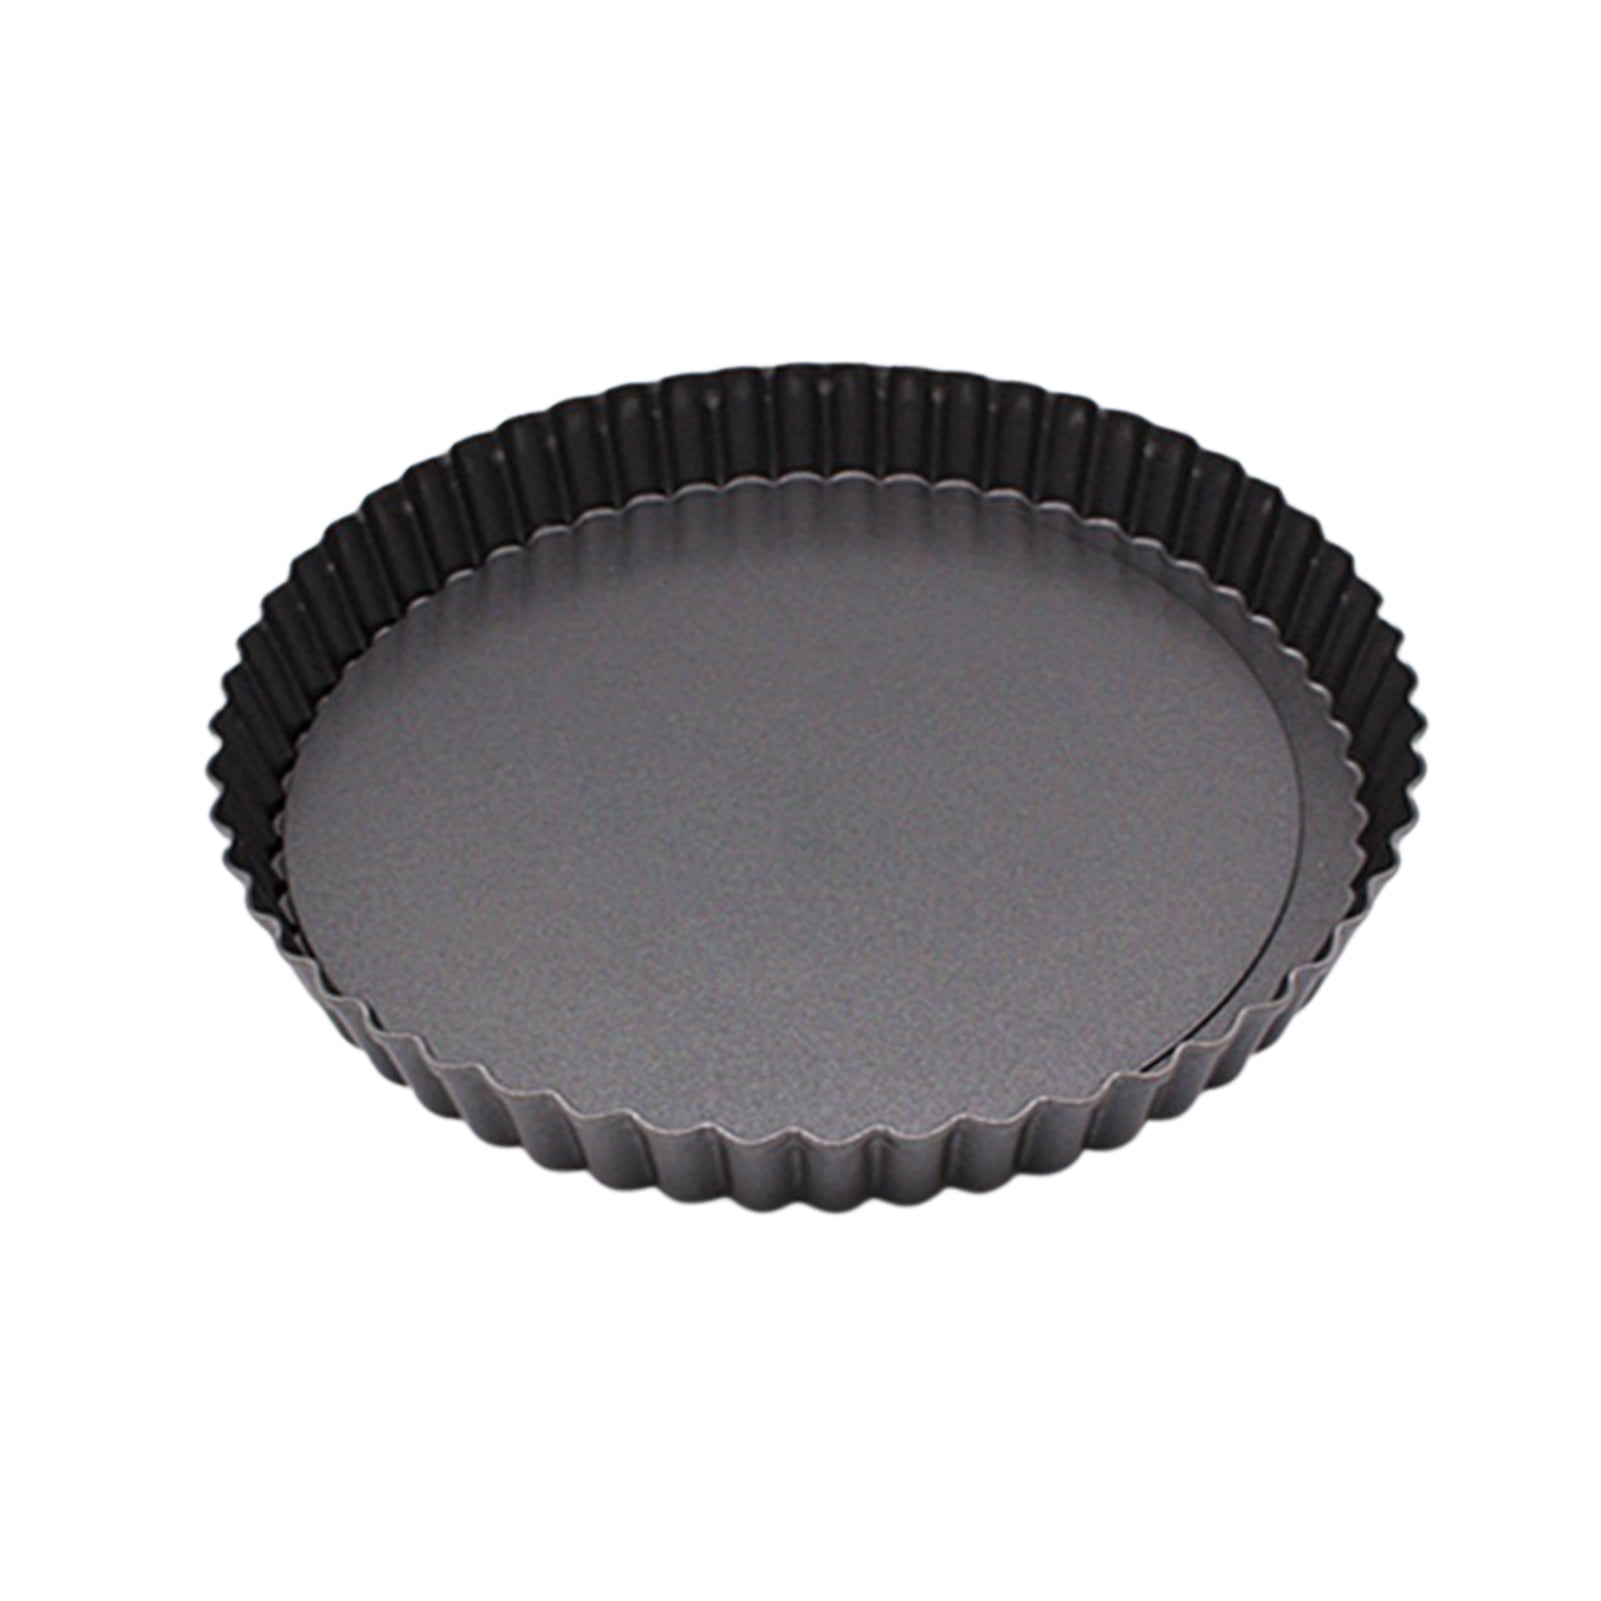 Tart Pie Pan 4 Inch with Removable Loose Bottom Mini Quiche Pizza Cake Pans Non-Stick Round Fluted Flan 6 PCS and Silicone Brush 